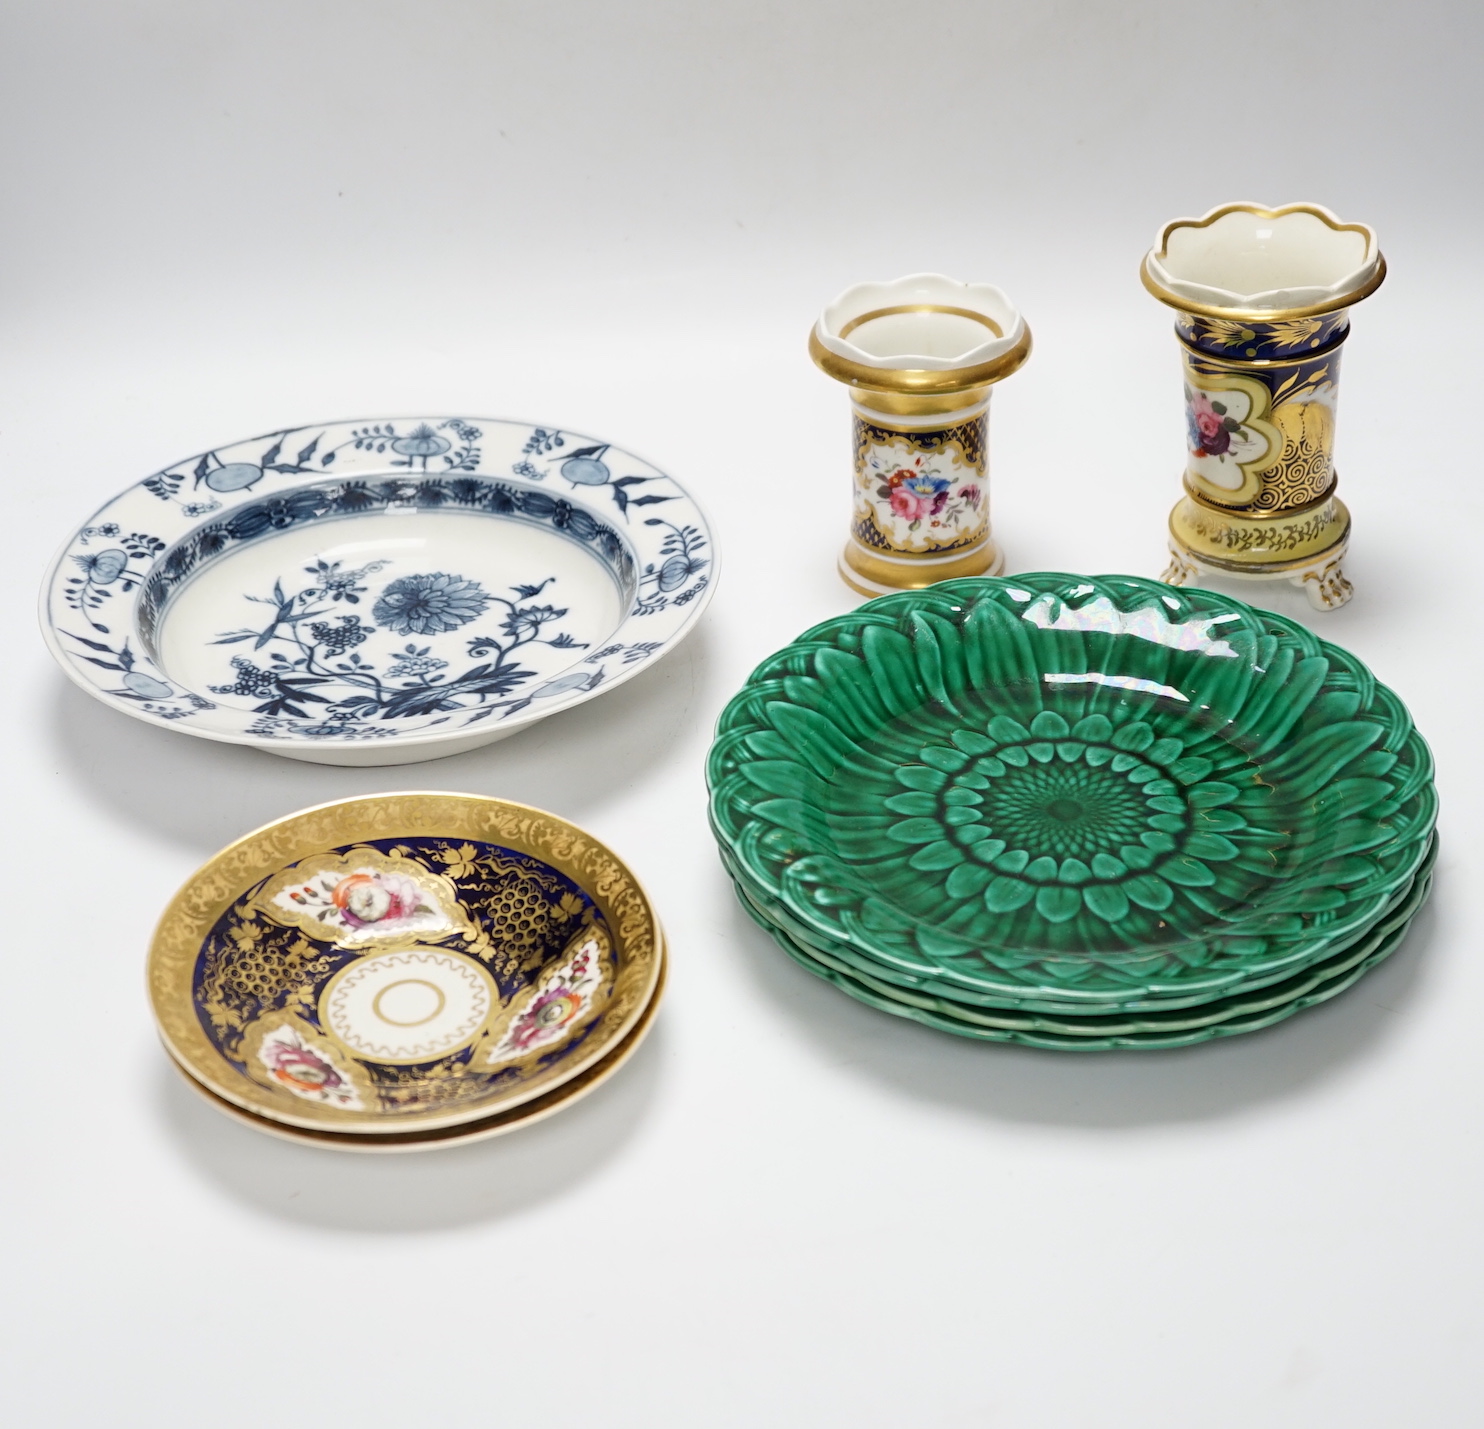 Four Victorian greenware plates, two Spode style vases, a pair of saucers and a blue and white plate